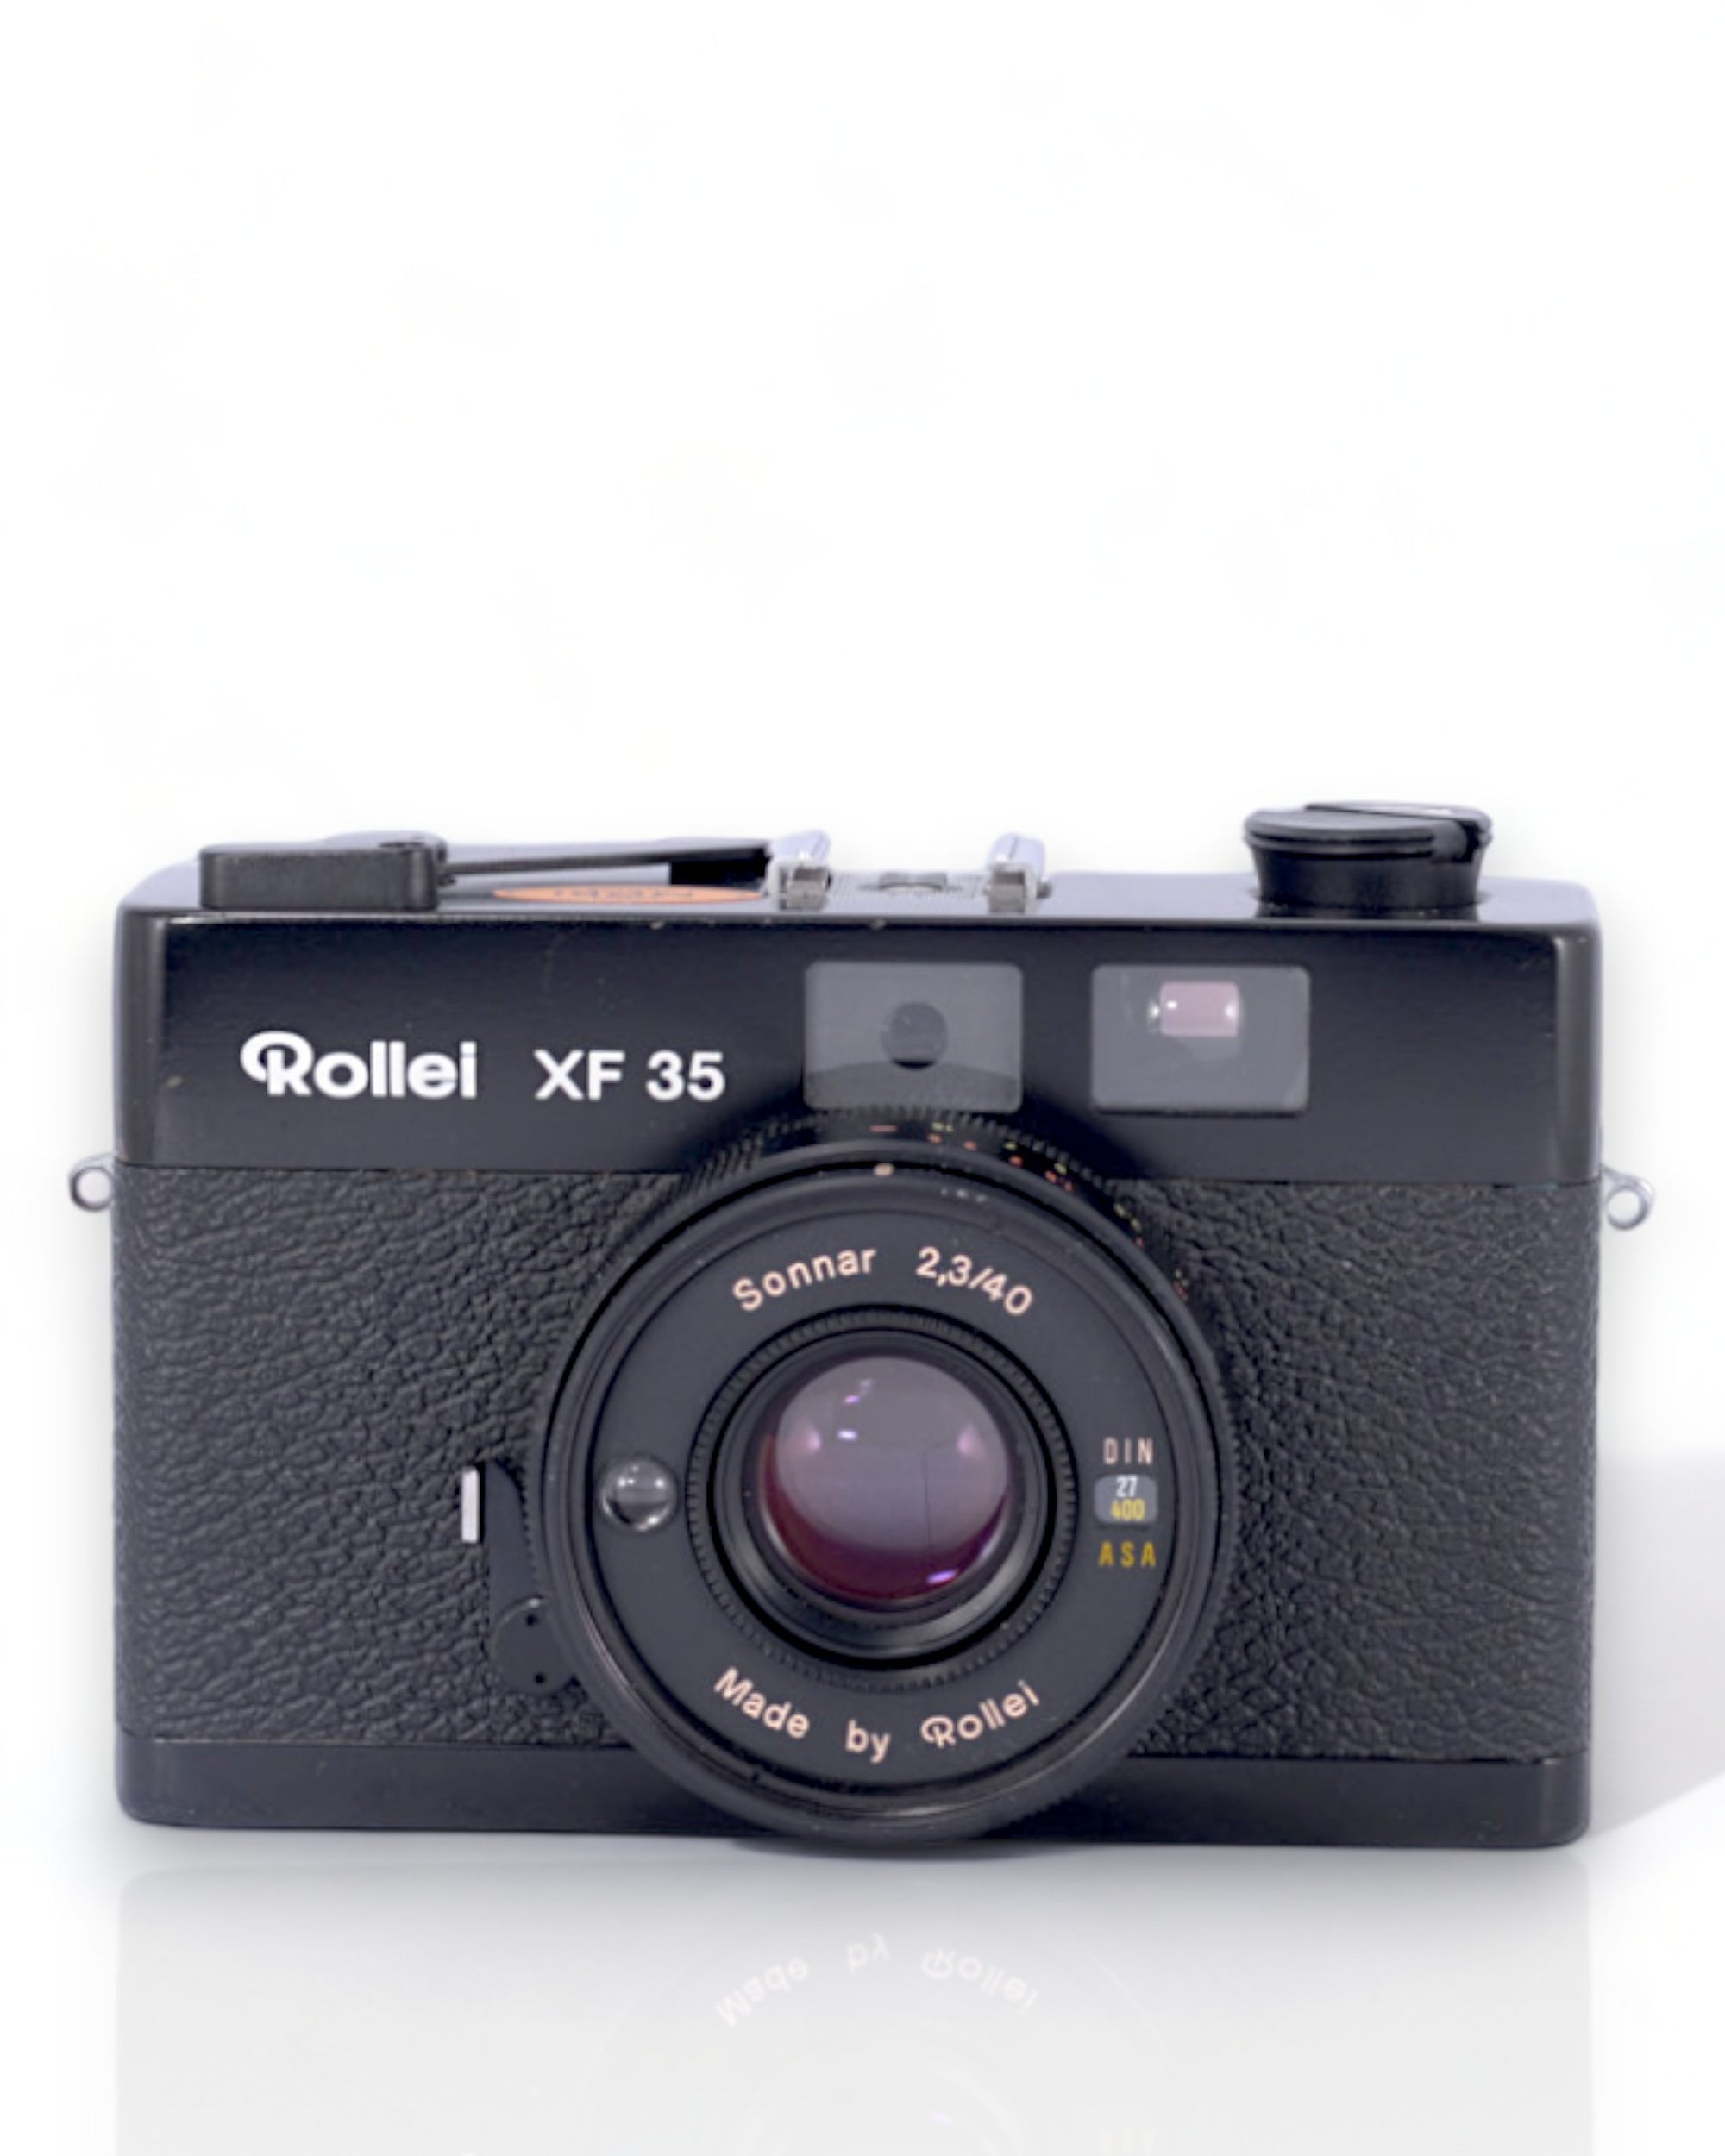 Rollei XF 35 35mm Rangefinder film camera with 40mm f2.3 lens